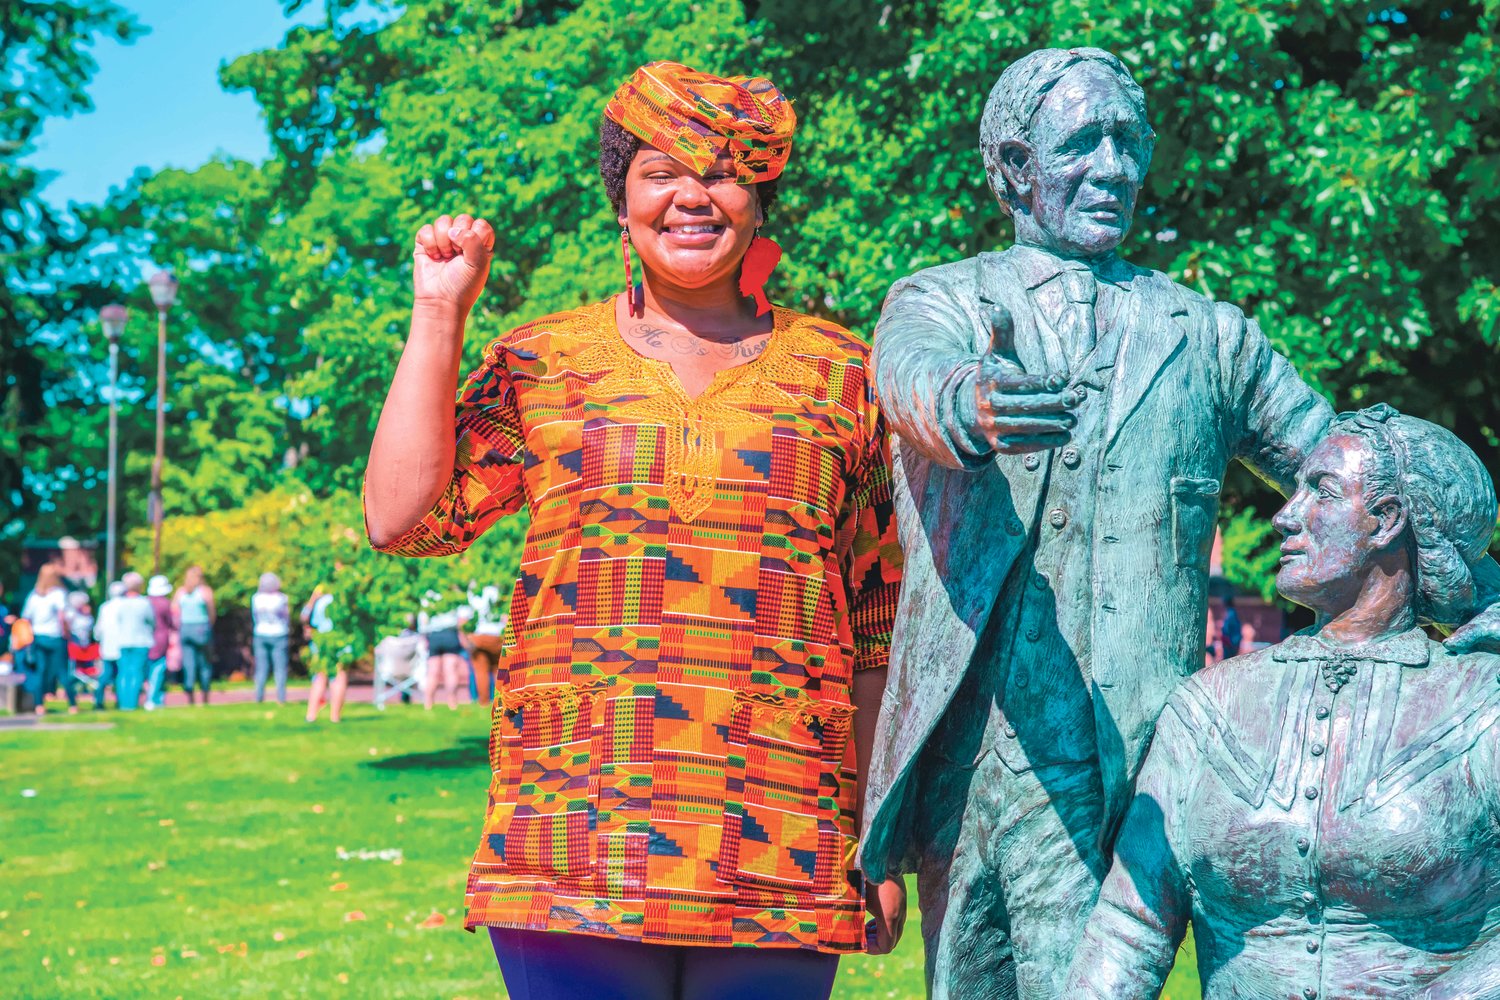 De-erica Waggener smiles and holds up her fist while posing next to the statue of George and Mary Jane Washington at George Washington Park during Juneteenth celebrations in Centralia last year.